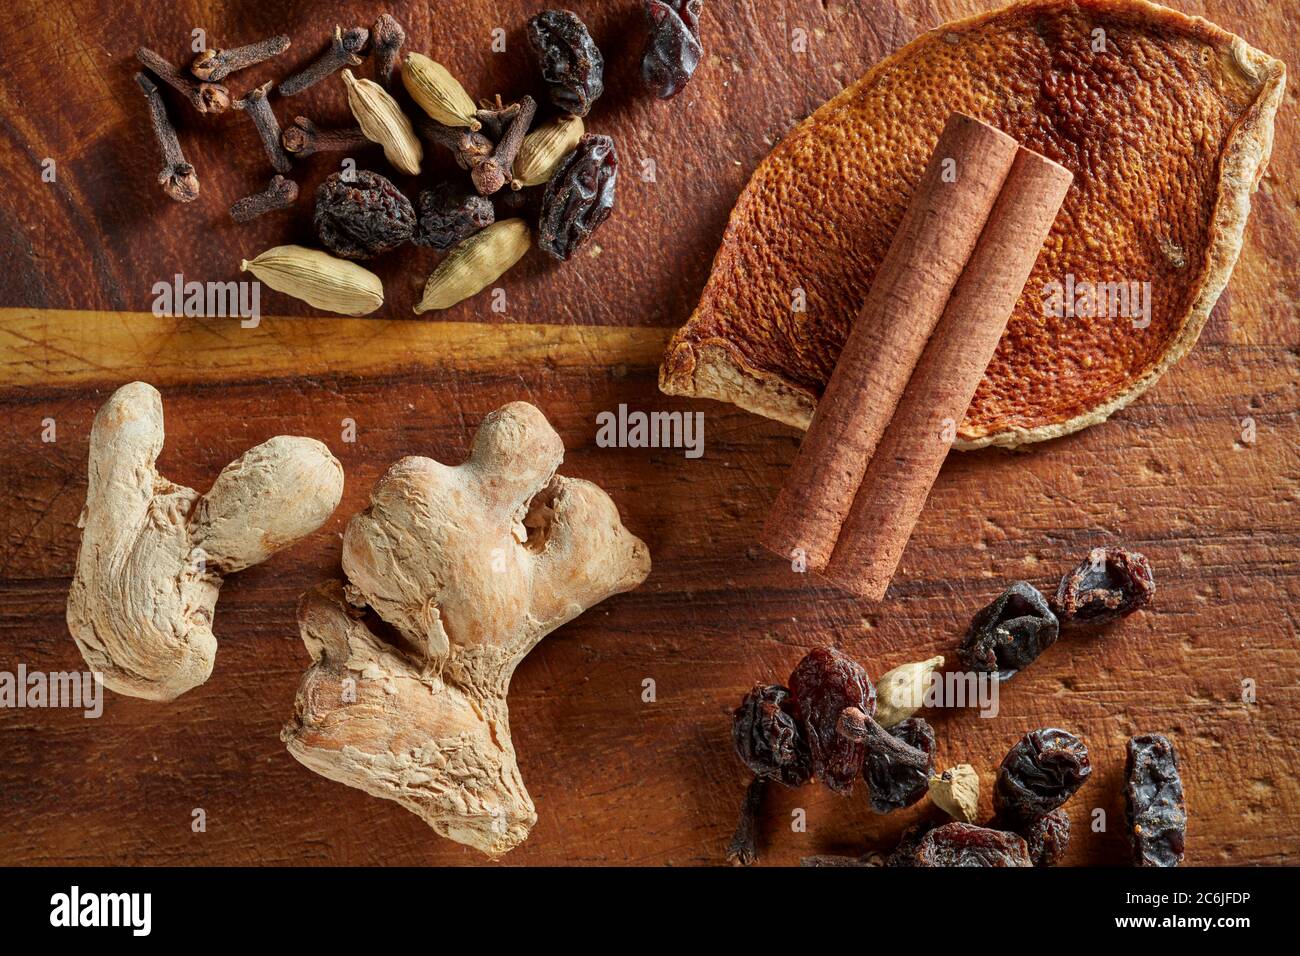 A mix of dry mulling spices (ginger, orange rind, raisins, cloves, cinnamon stick, cardamom pods) on wooden board. Stock Photo